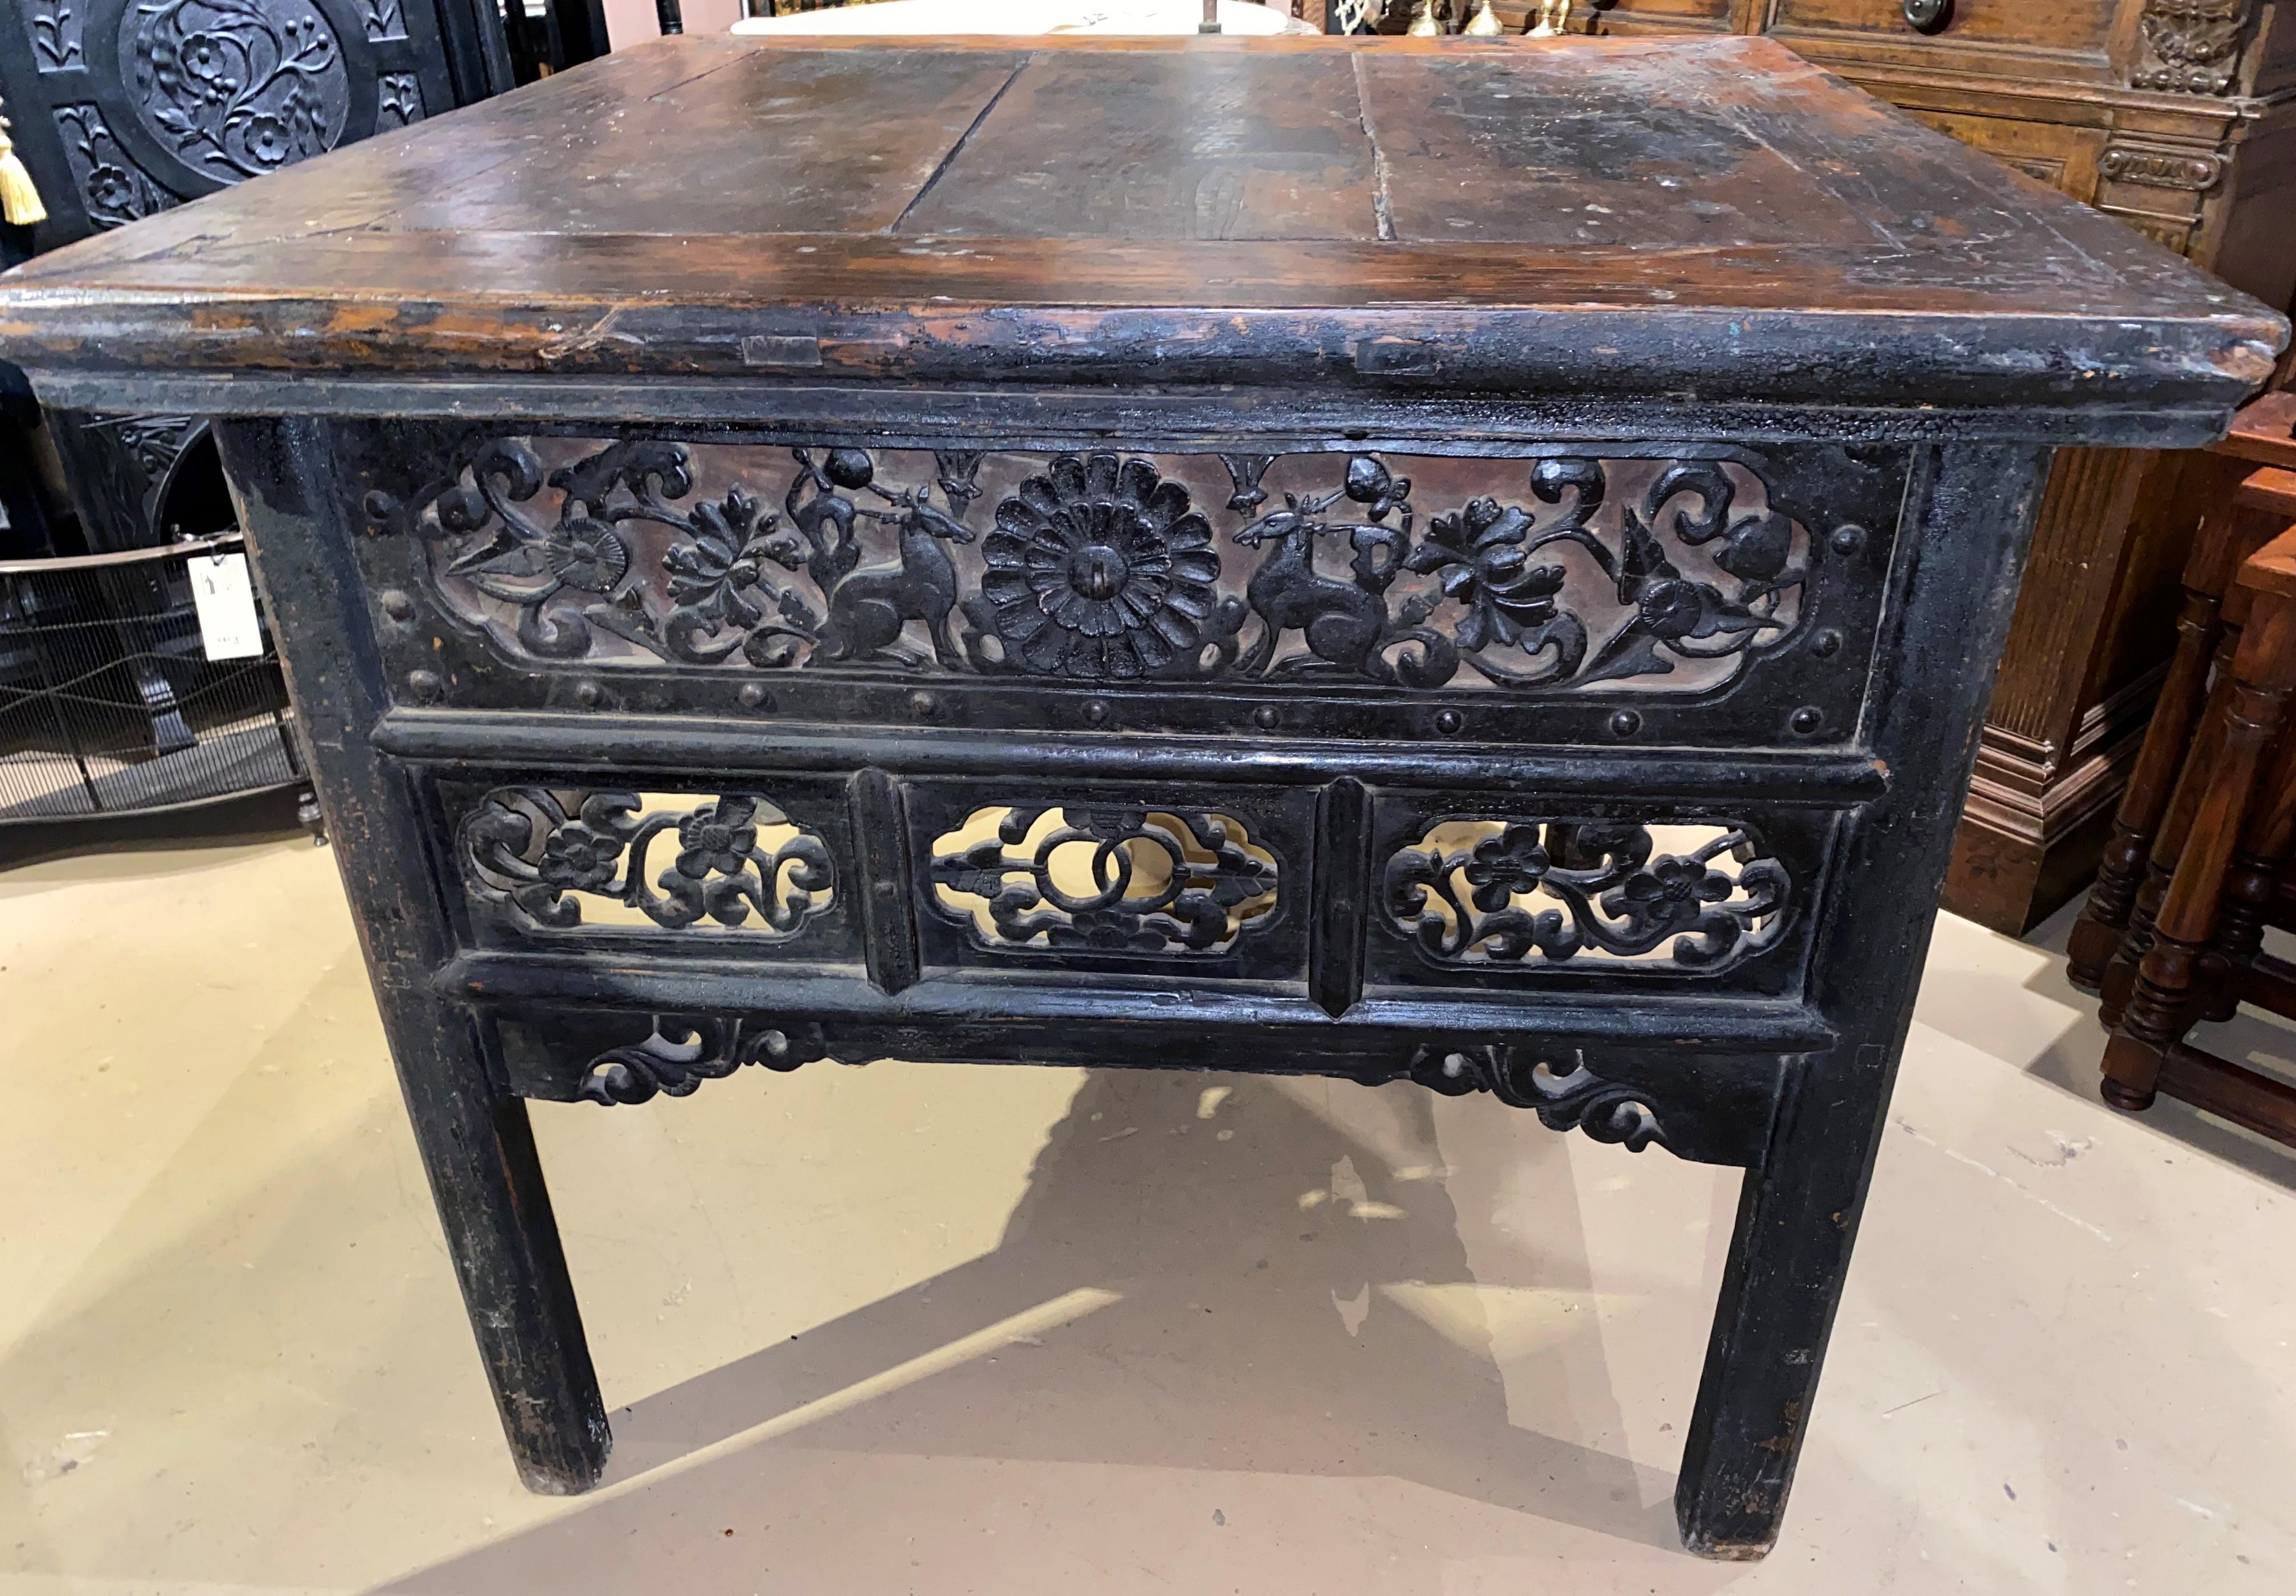 A fine example of a Chinese heavily carved hardwood center table, with a bordered three board top surmounting a pierce carved frieze on all four sides featuring deer, flowers, and scrollwork, all supported by four square legs. Dates to the 19th